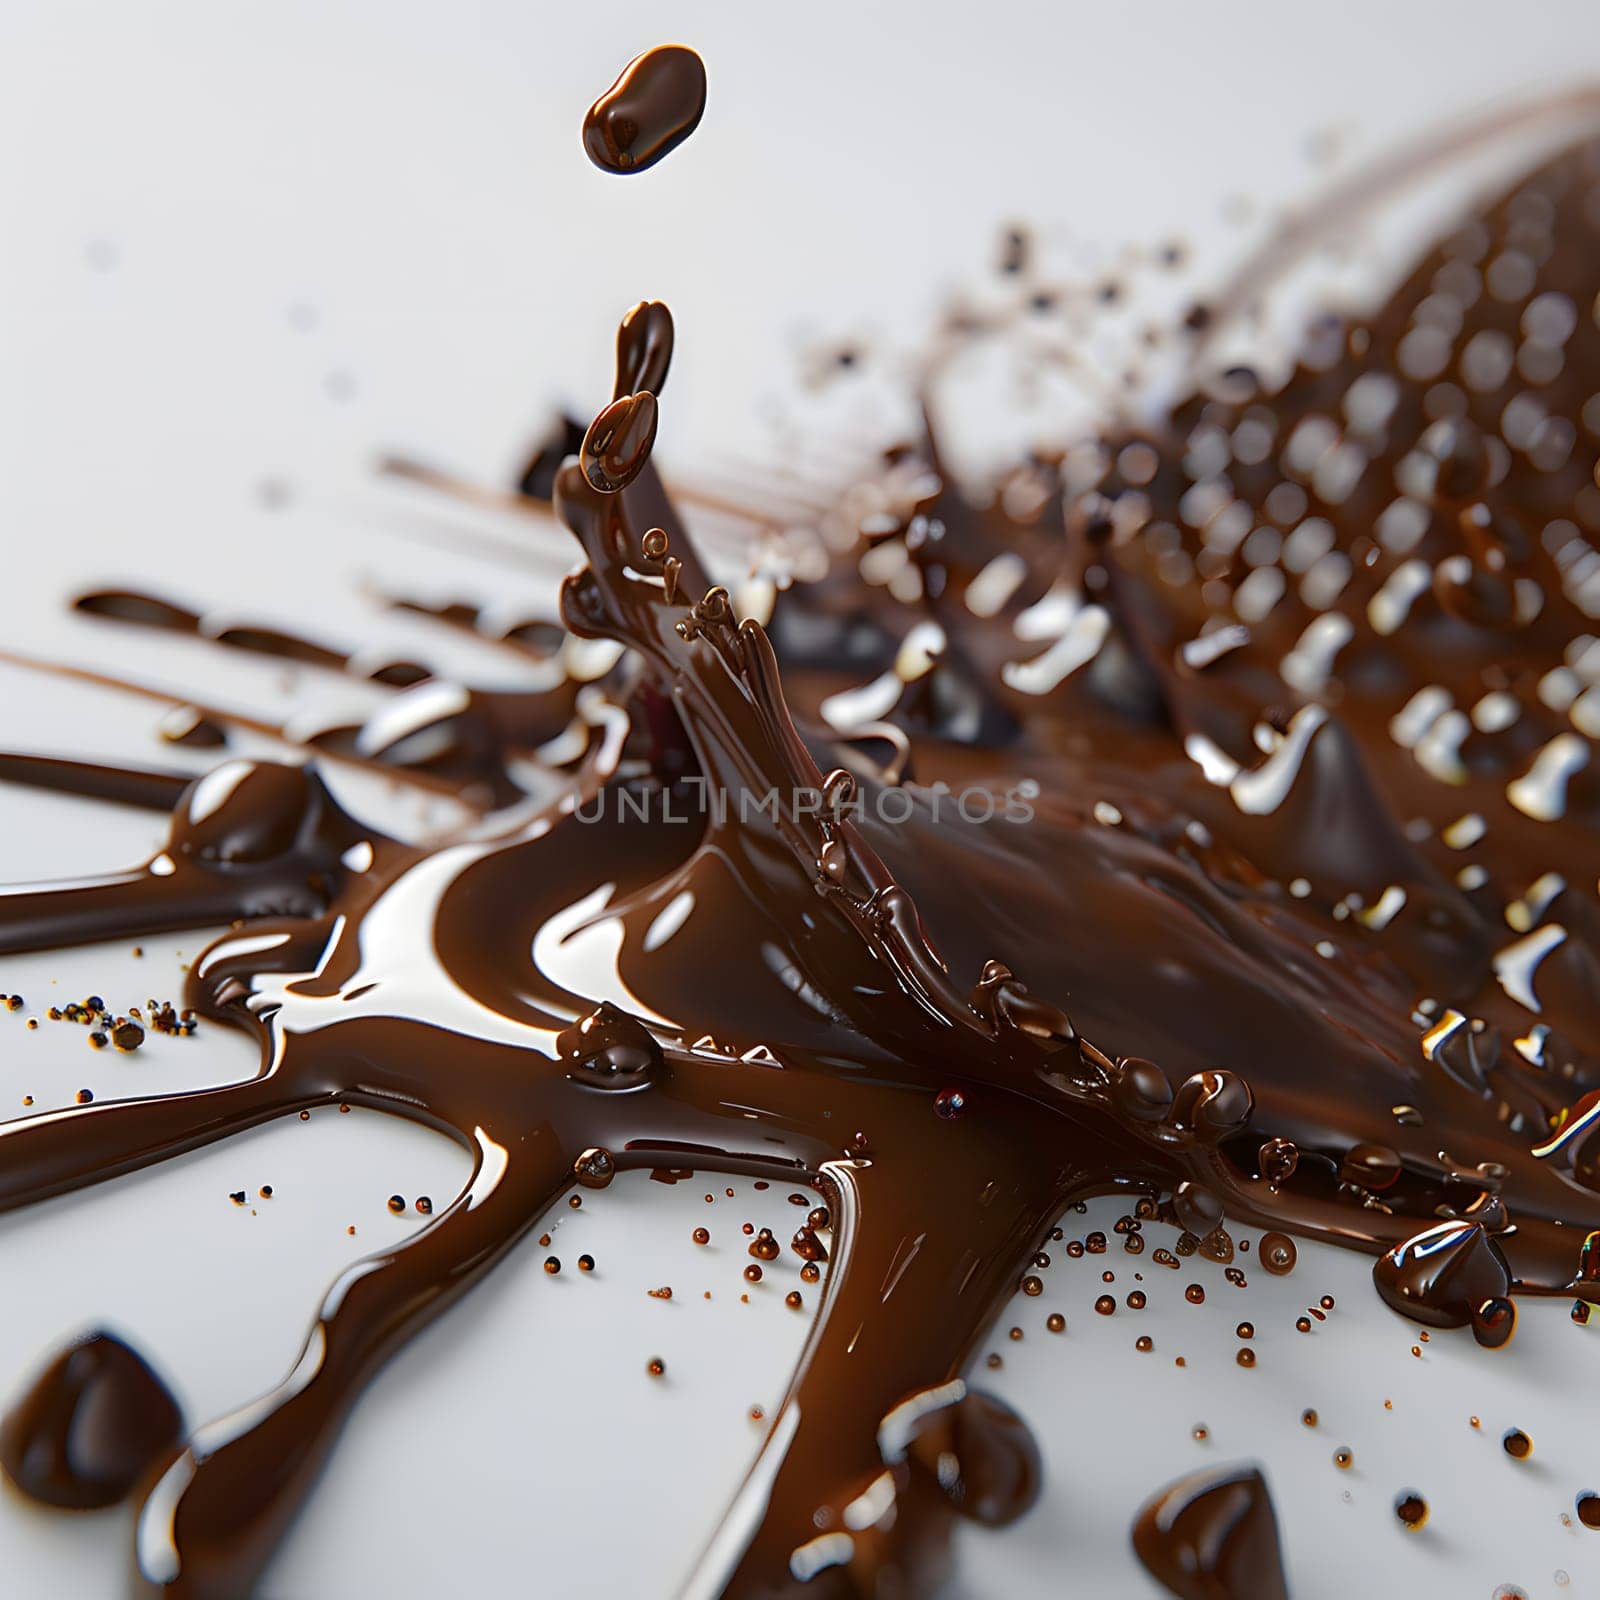 A brown, liquid chocolate spread adding sweetness to a white surface, a key ingredient in many cuisines and dishes